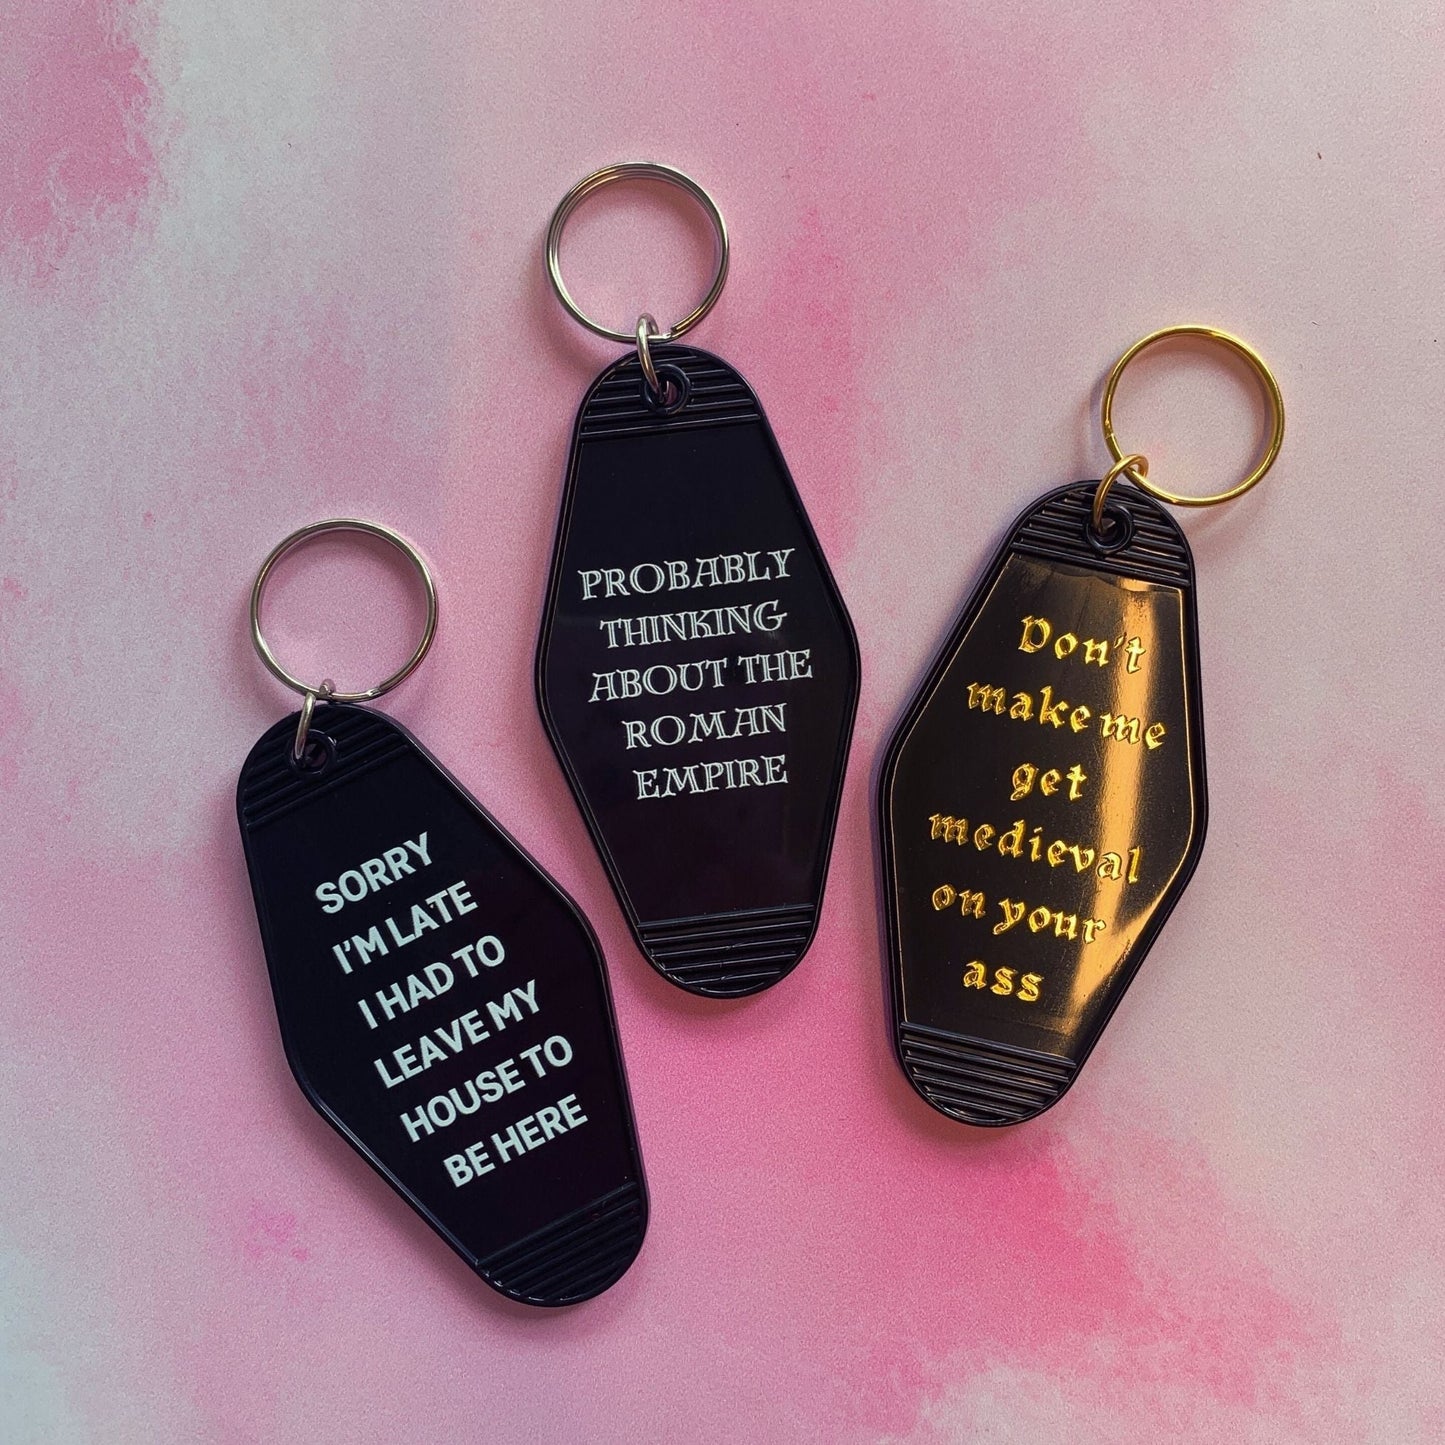 Don't Make Me Get Medieval on Your Ass Motel Style Keychain in Black